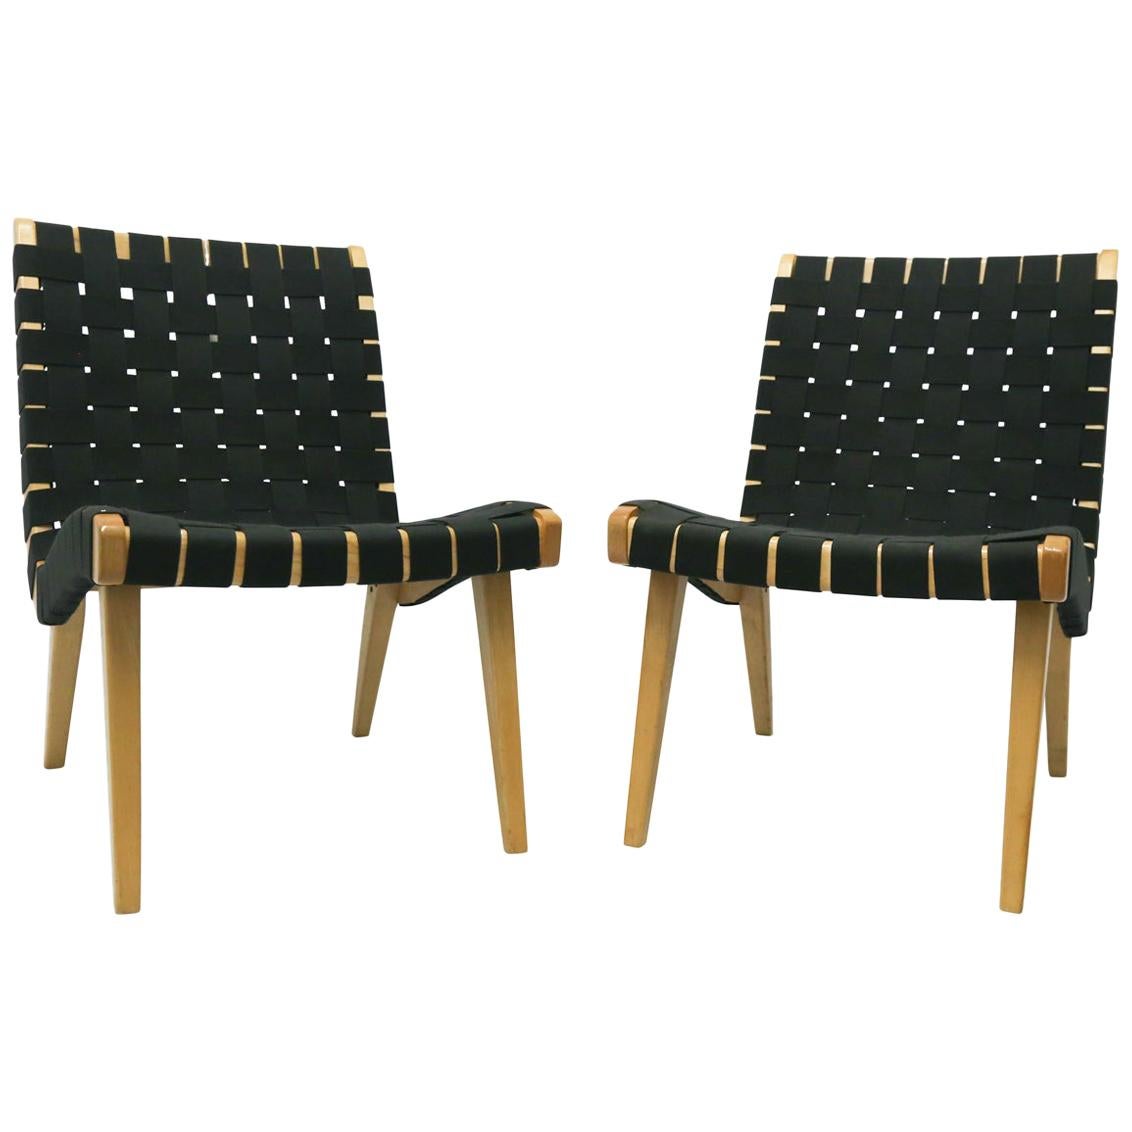 Pair of Jens Risom Lounge Chairs for Knoll with Black Webbing